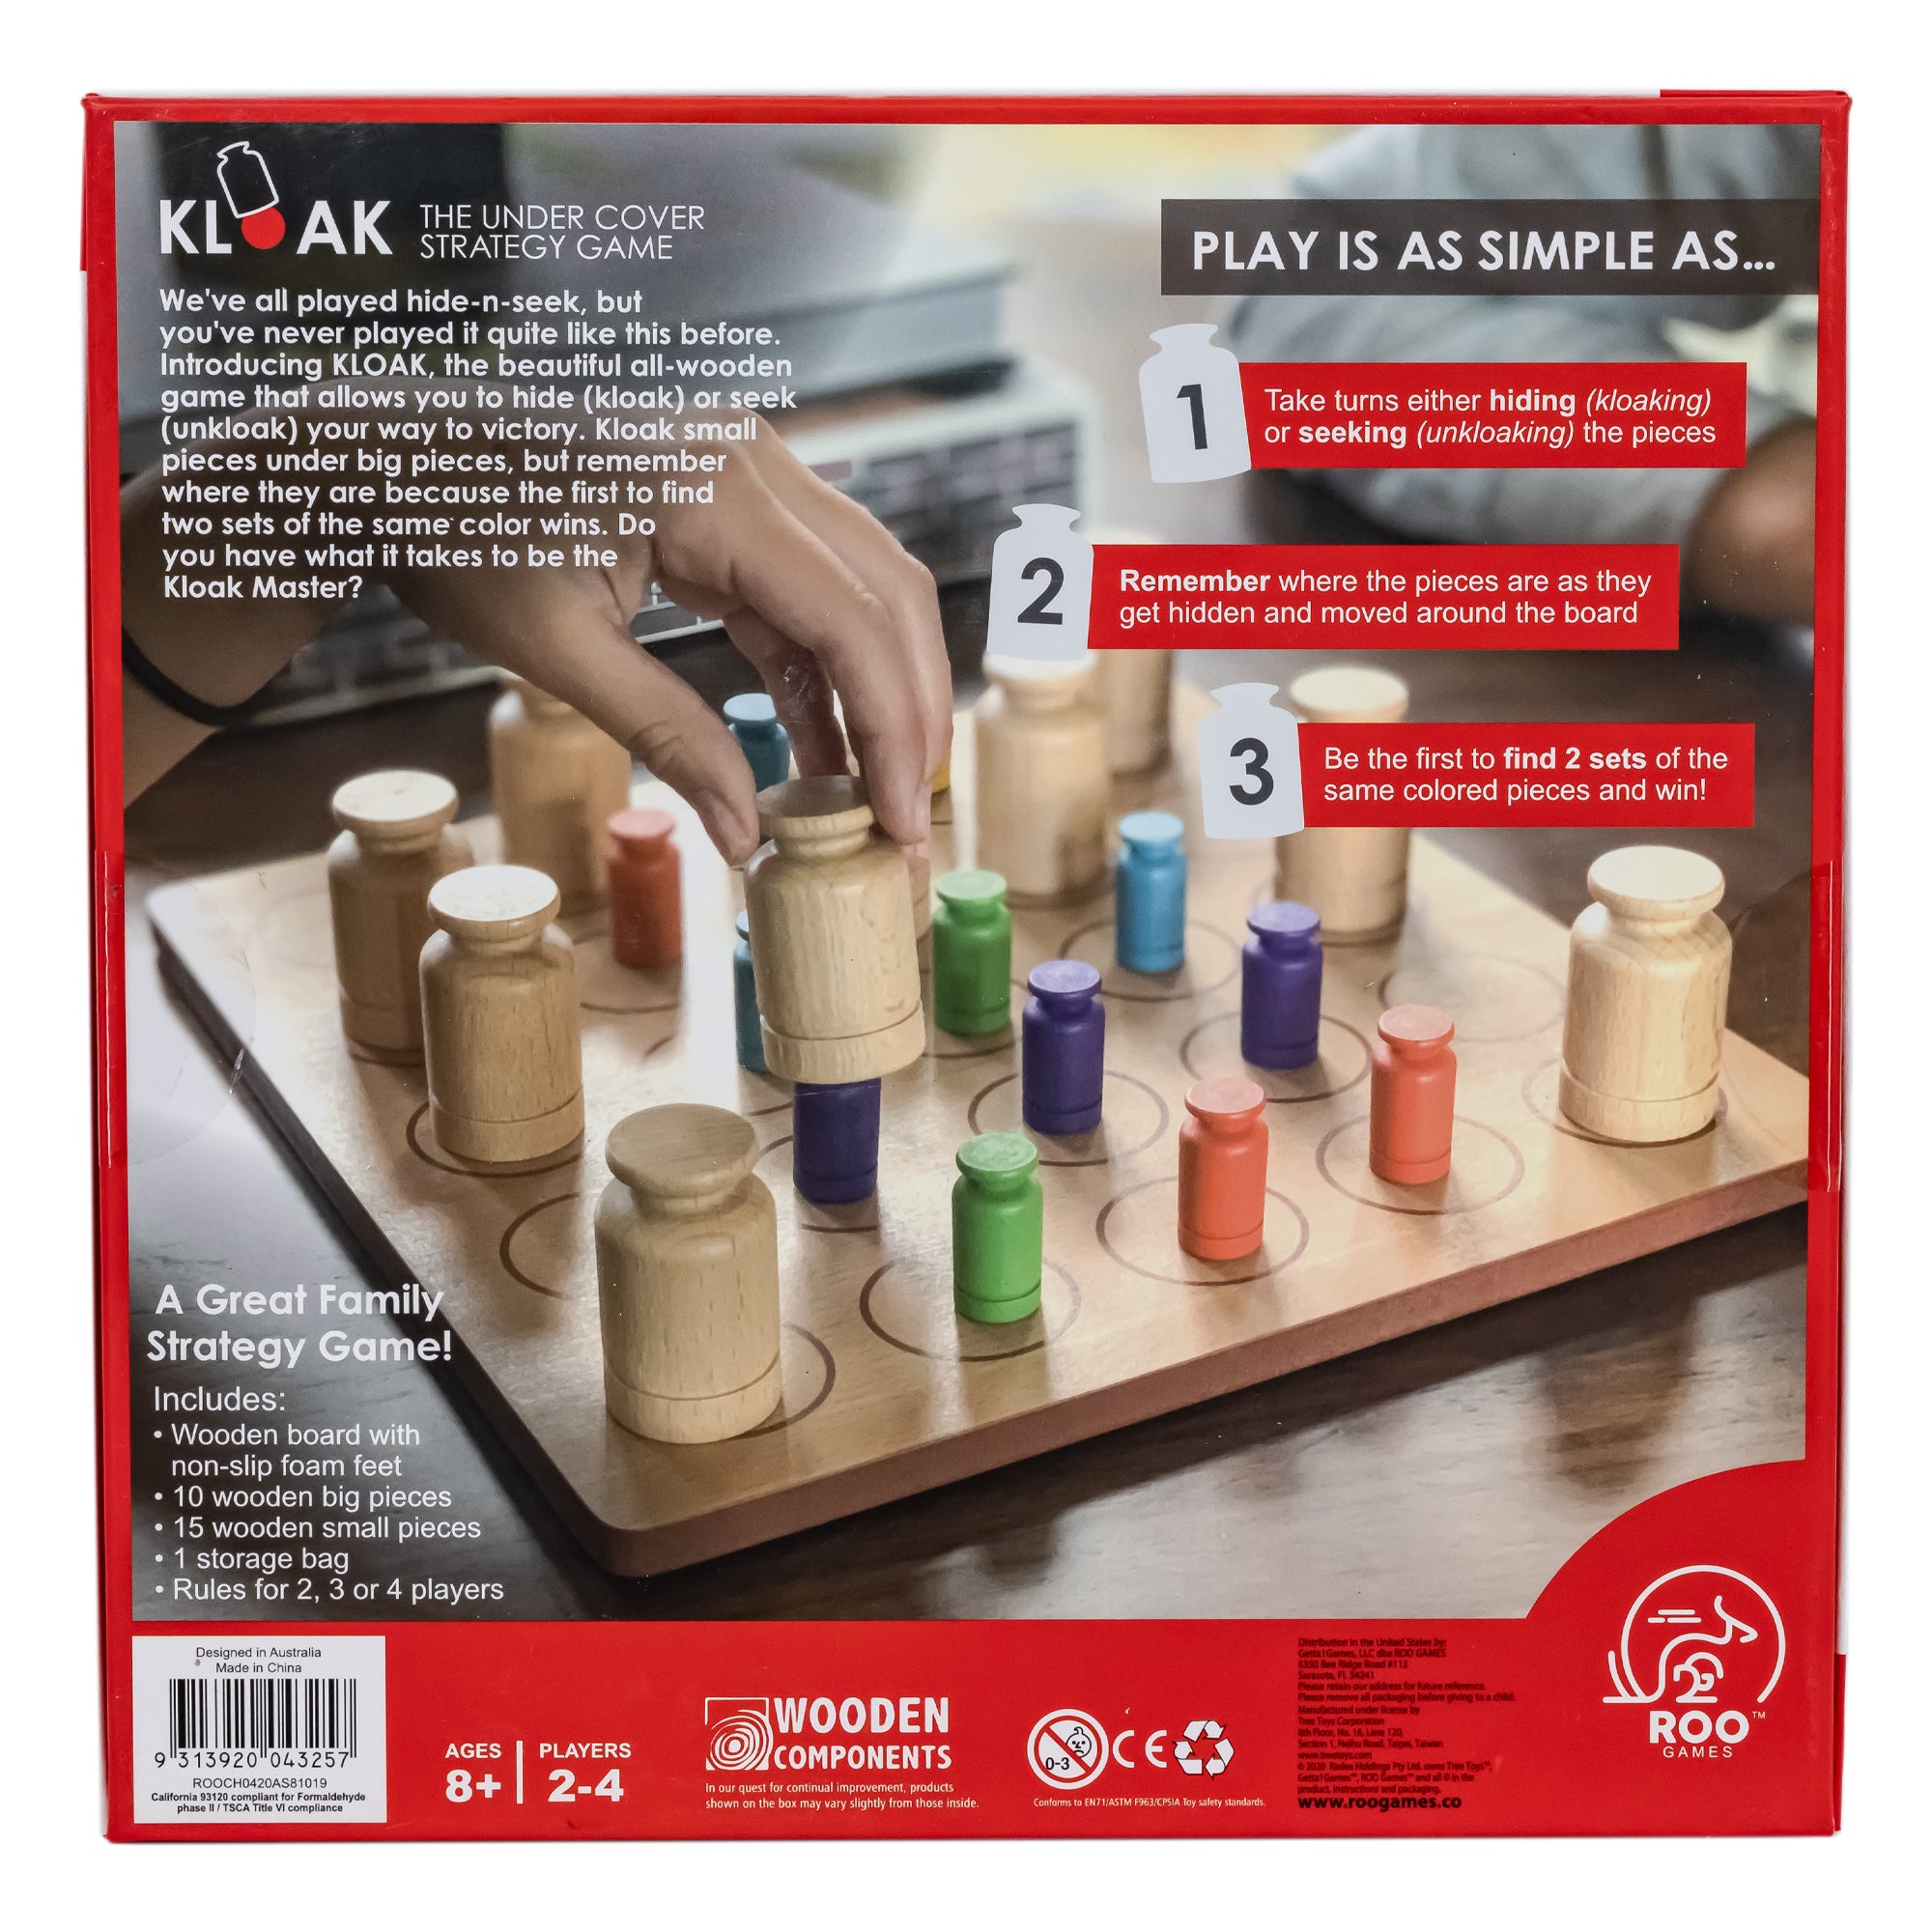 The back of the Kloak game box. The background is an image of the game in play with a hand coming from the top and reaching down to grab a cover piece that is over a purple piece. The square board is wooden with rounded corners and a grid of 5 by 5 circles on top. The pieces on top are colored wooden pieces that are rectangular with a tip shaped like a knob. The cover pieces are the same shape, but larger, and are wood colored. There is white text on the left and 3 step instructions in the upper-right.